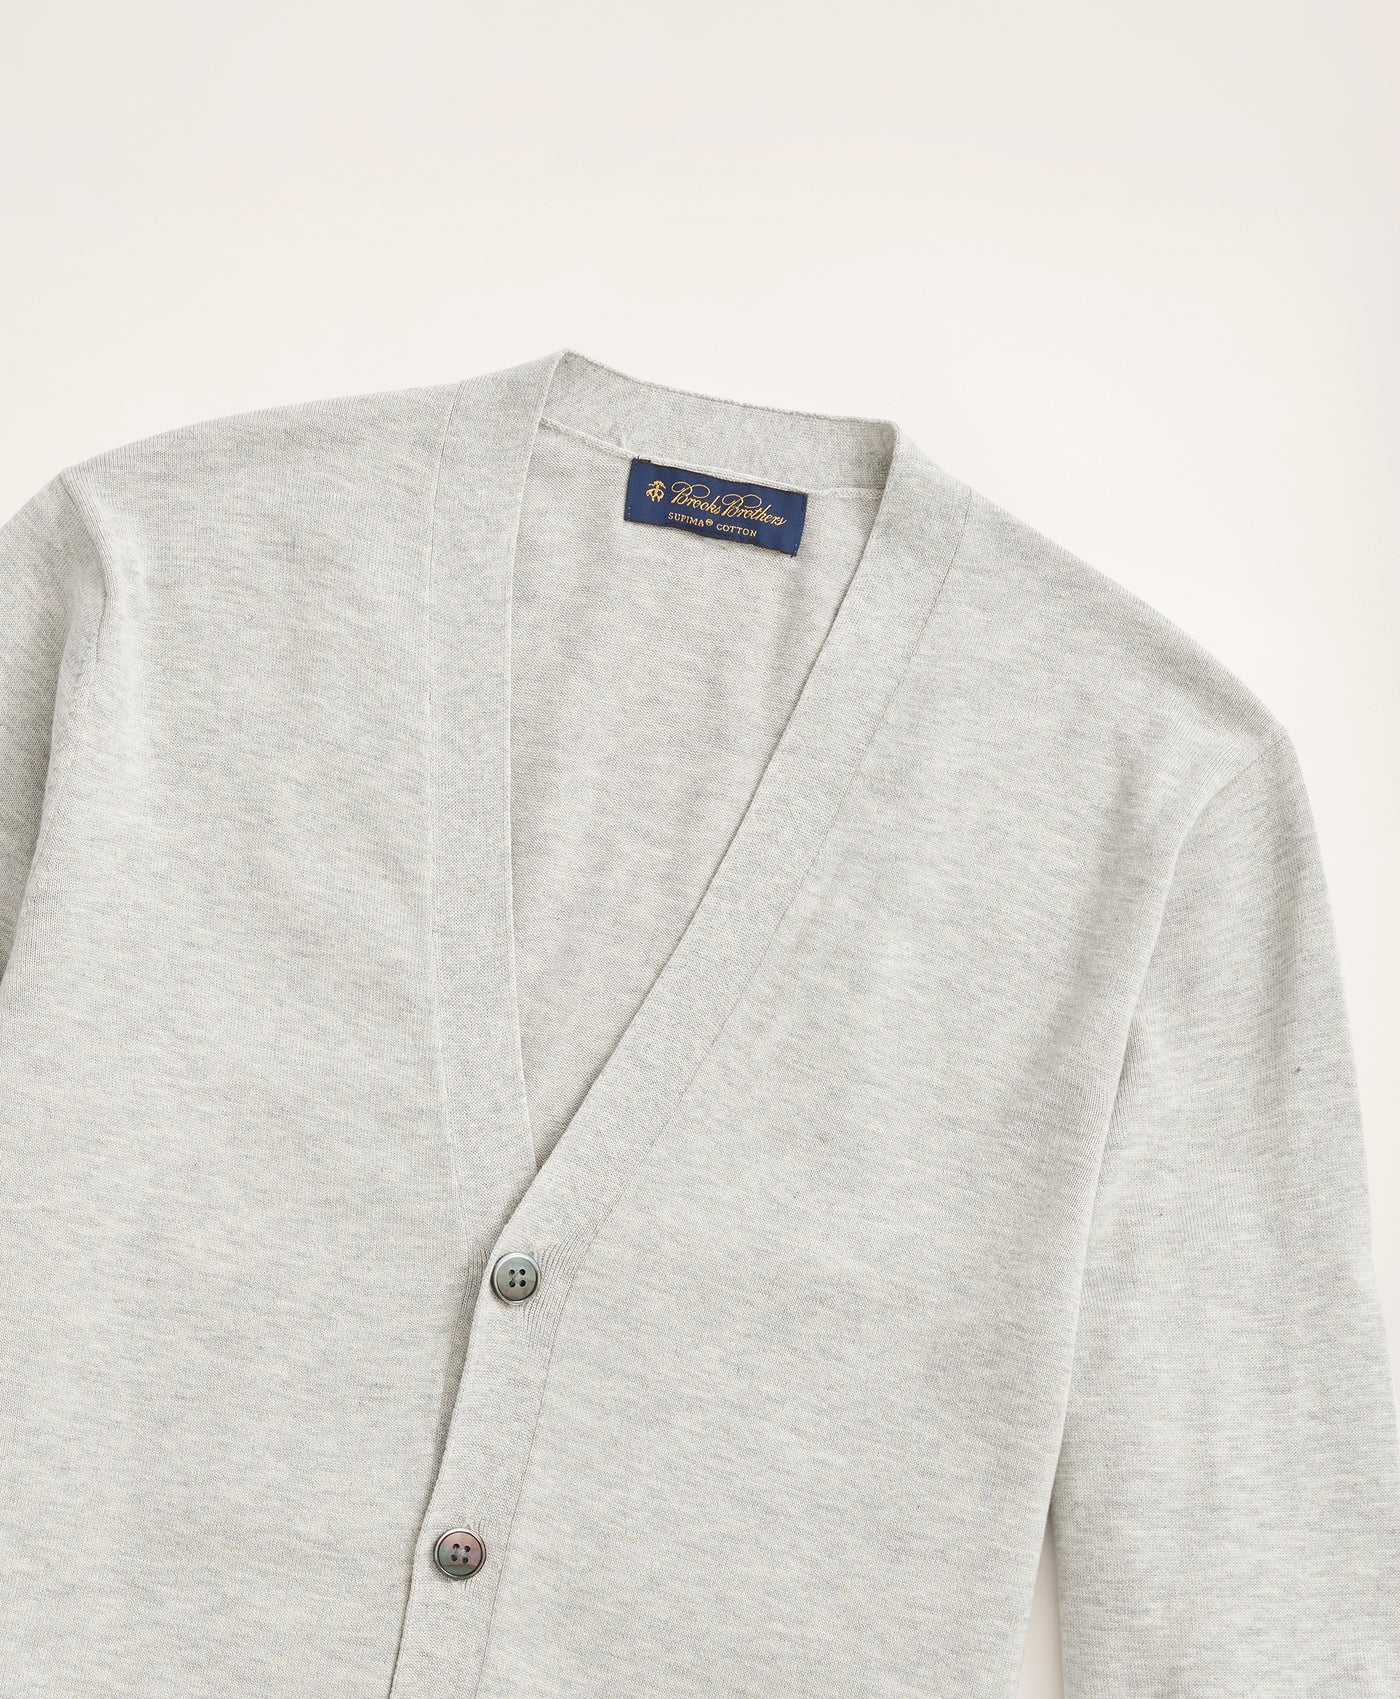 Supima Cotton Button-Front Cardigan - Brooks Brothers Canada